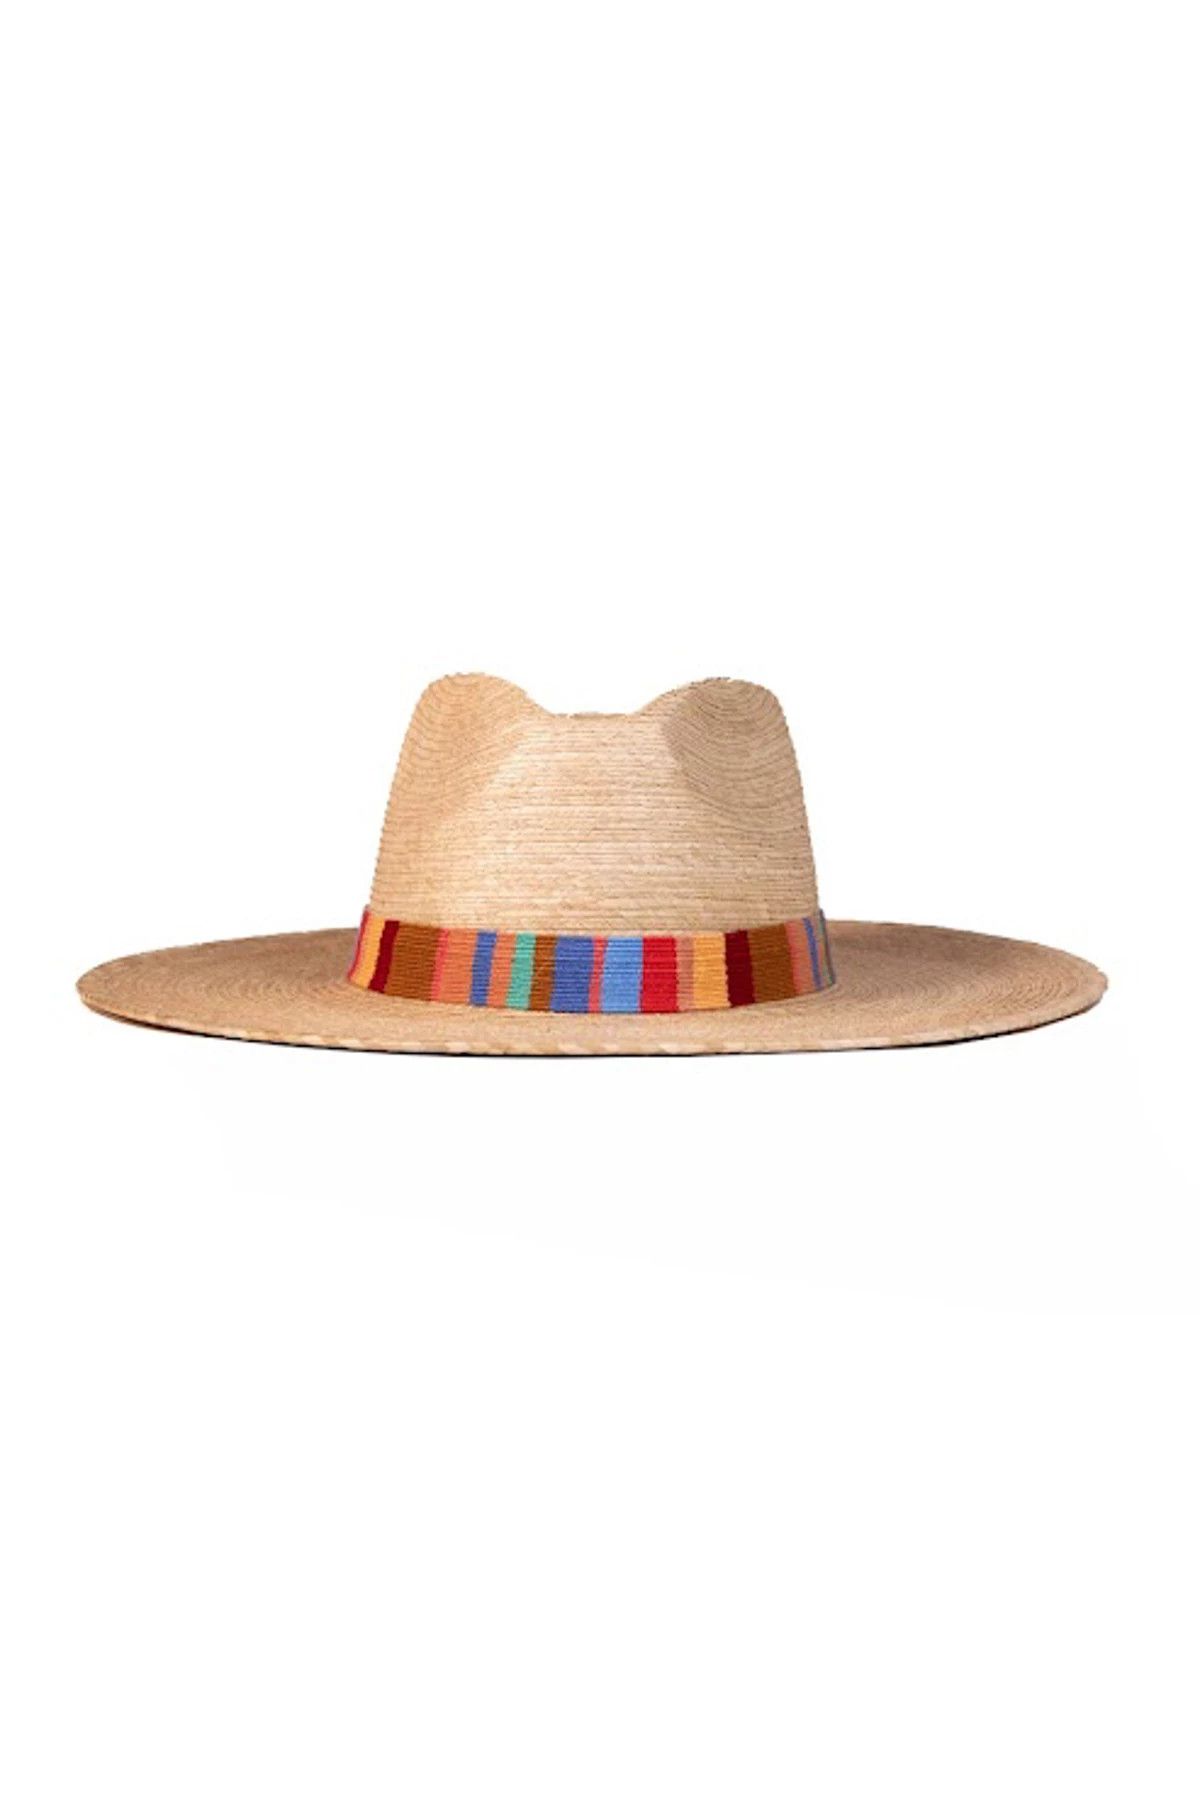 Guadalupe Palm Panama Hat | Everything But Water